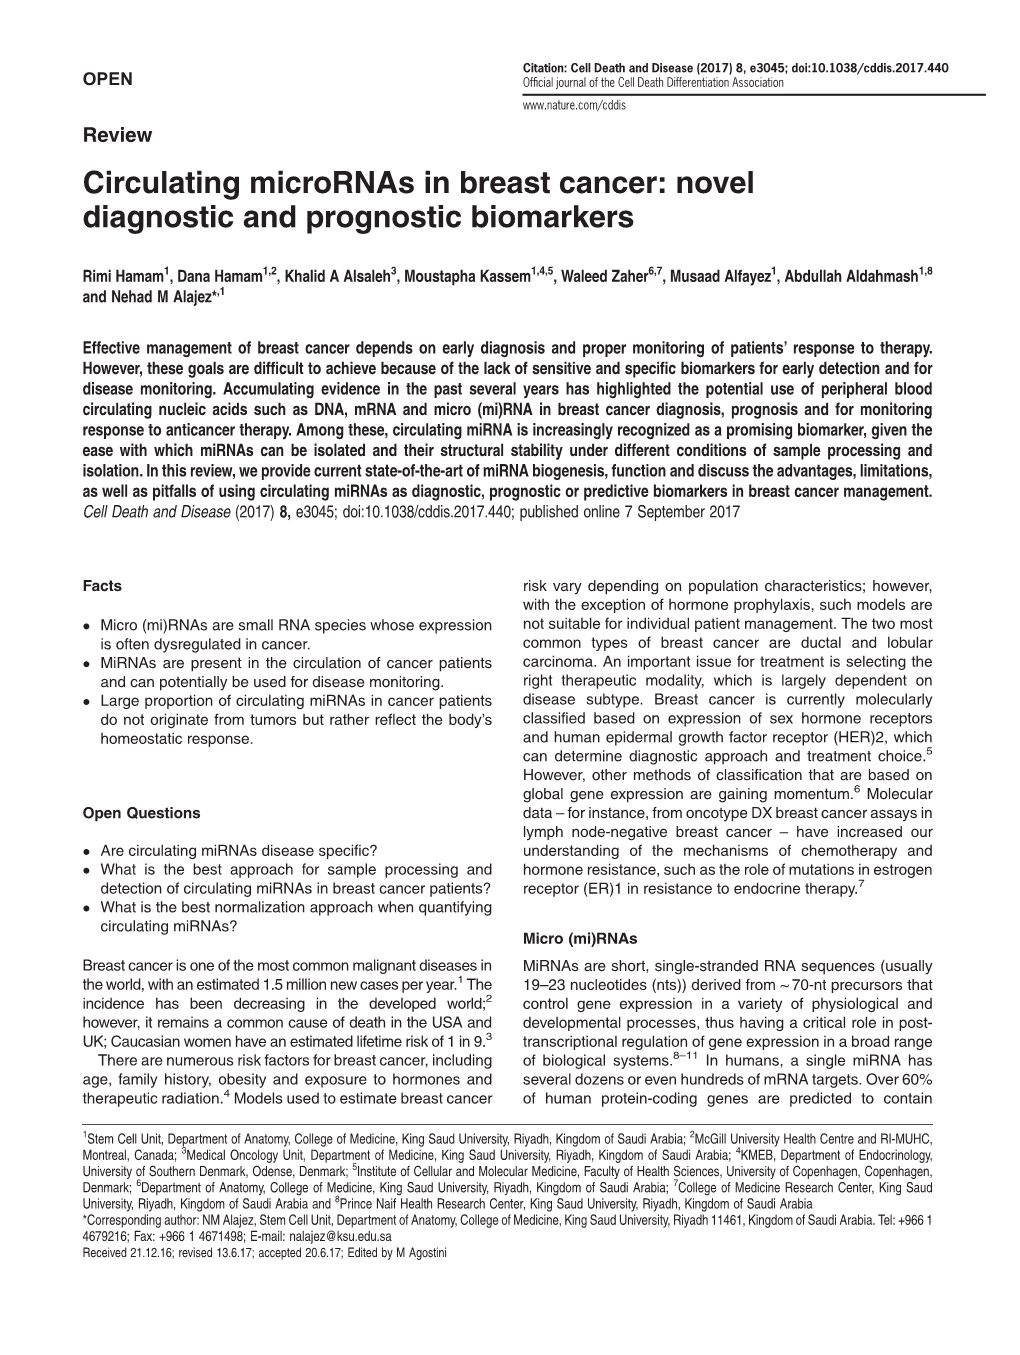 Circulating Micrornas in Breast Cancer: Novel Diagnostic and Prognostic Biomarkers